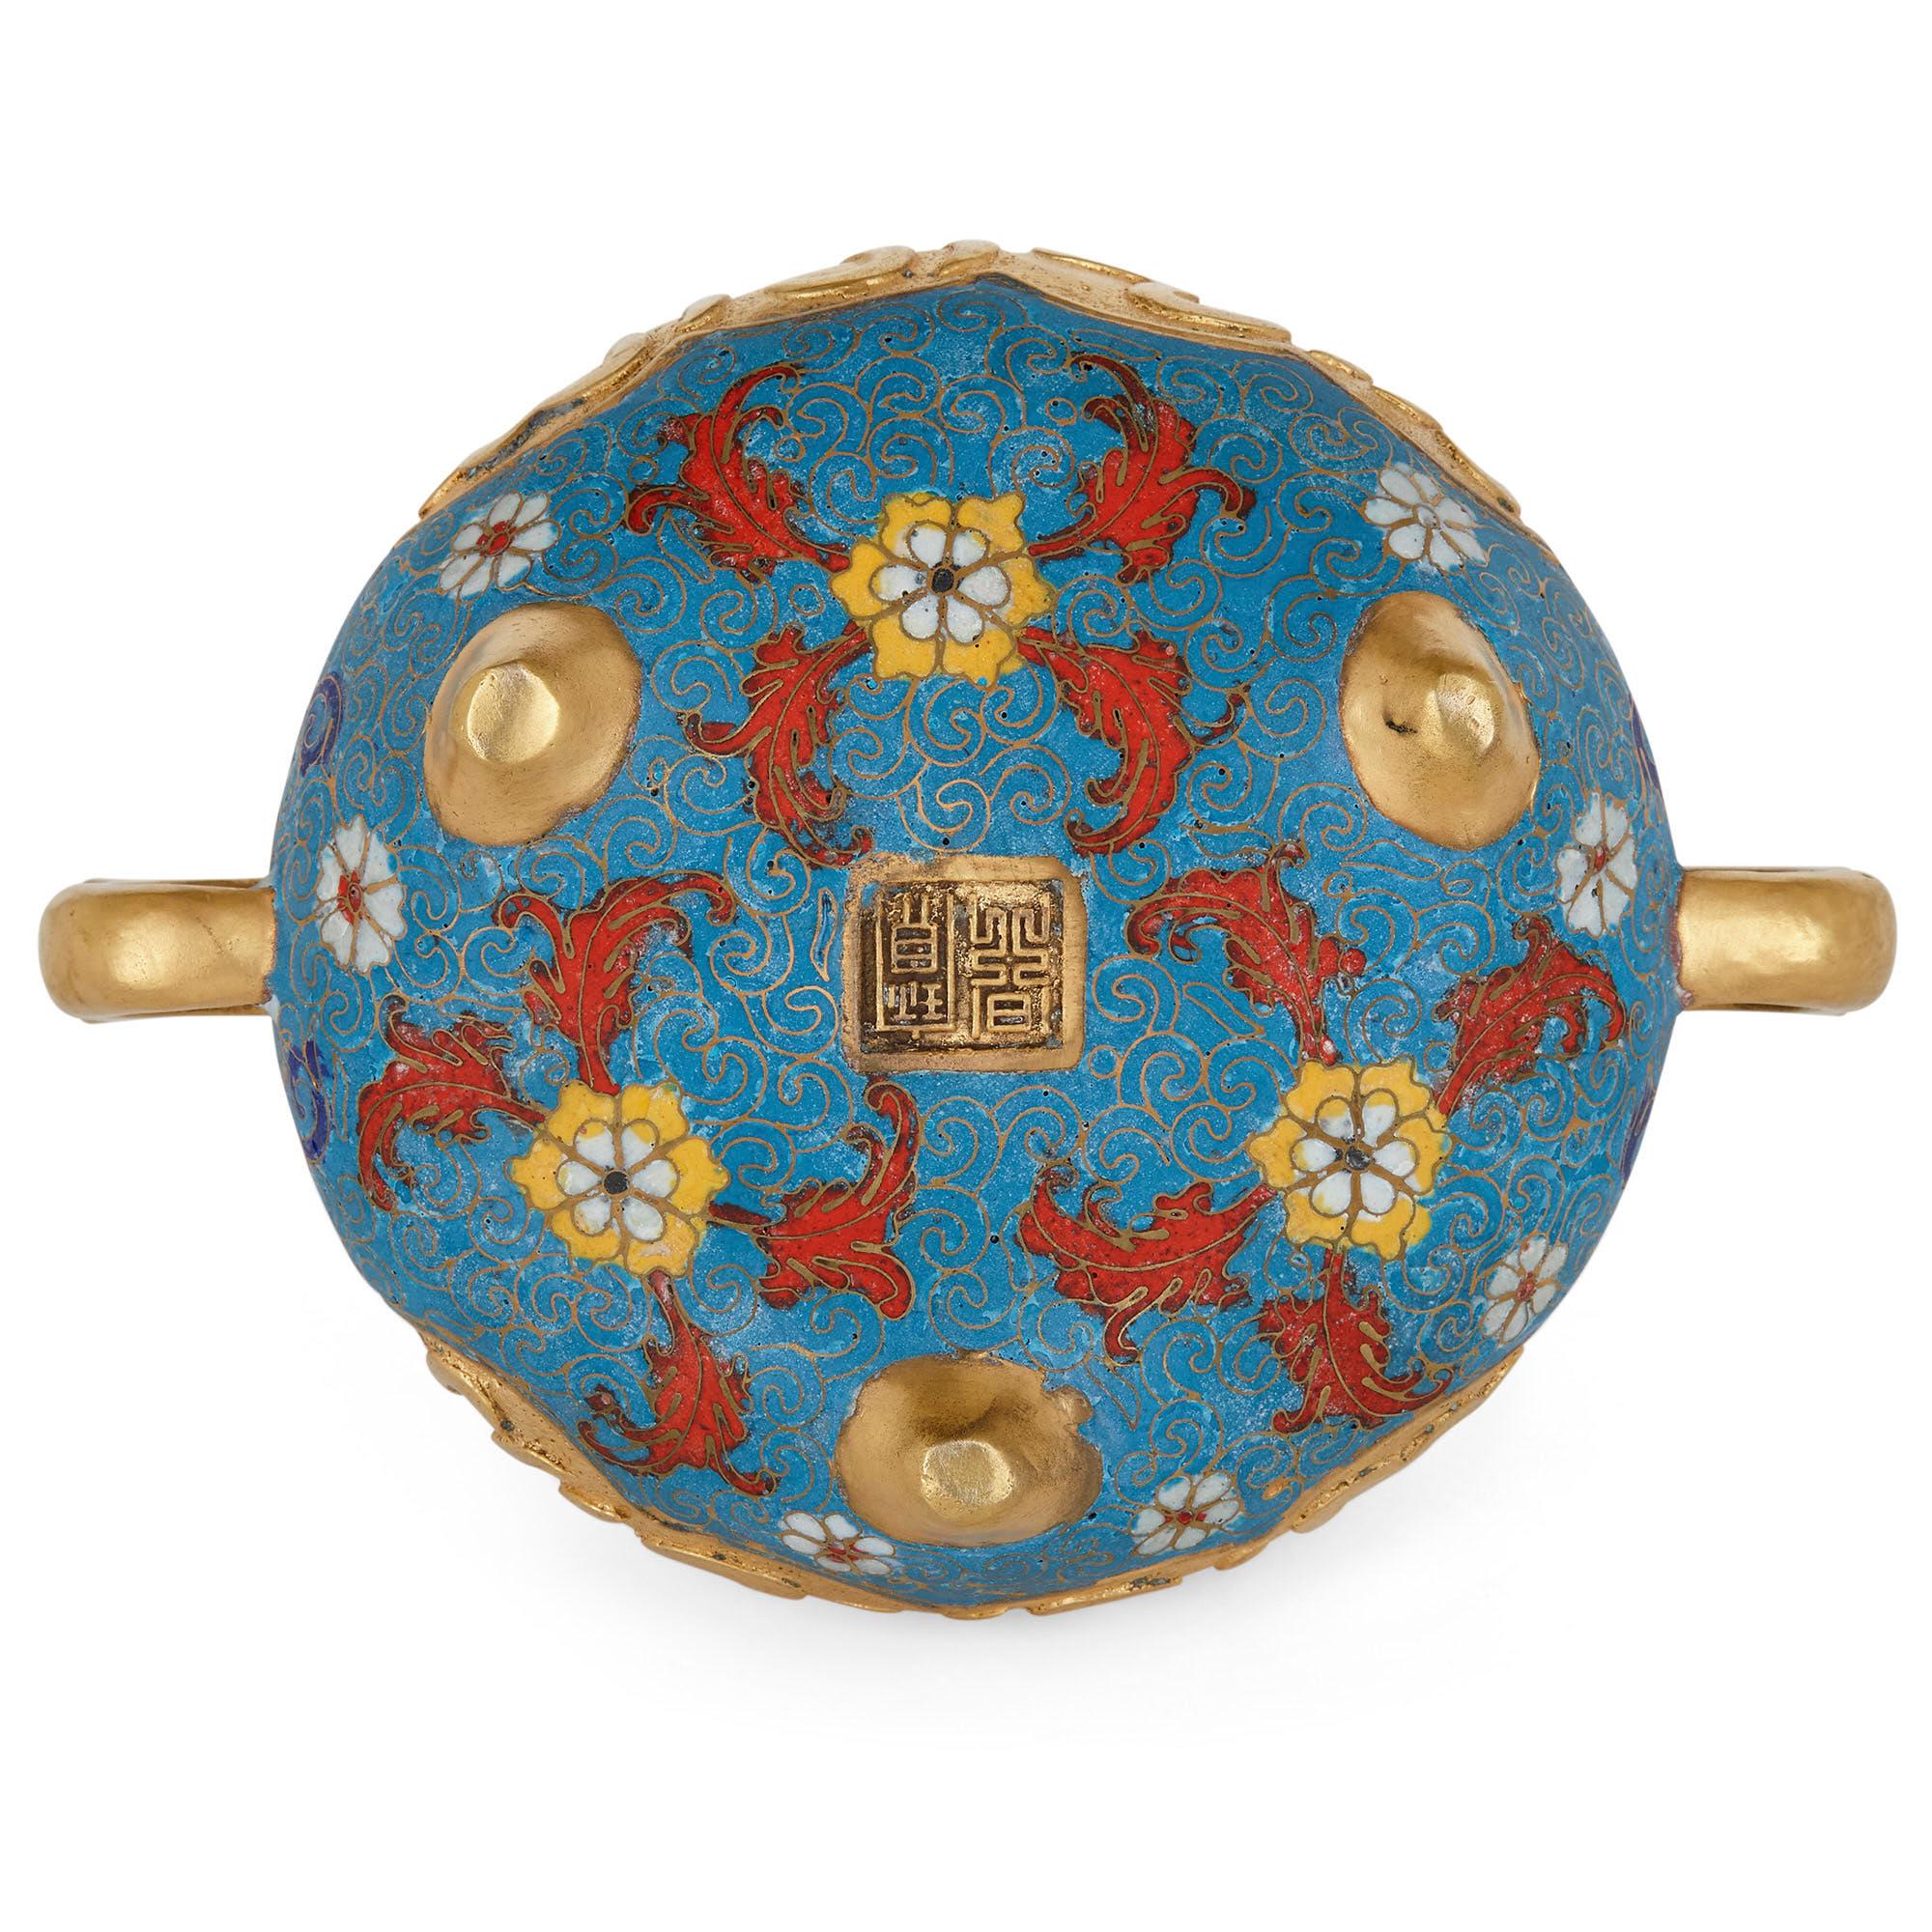 20th Century Antique Chinese Ormolu and Cloisonné Enamel Vase for the Islamic Market For Sale